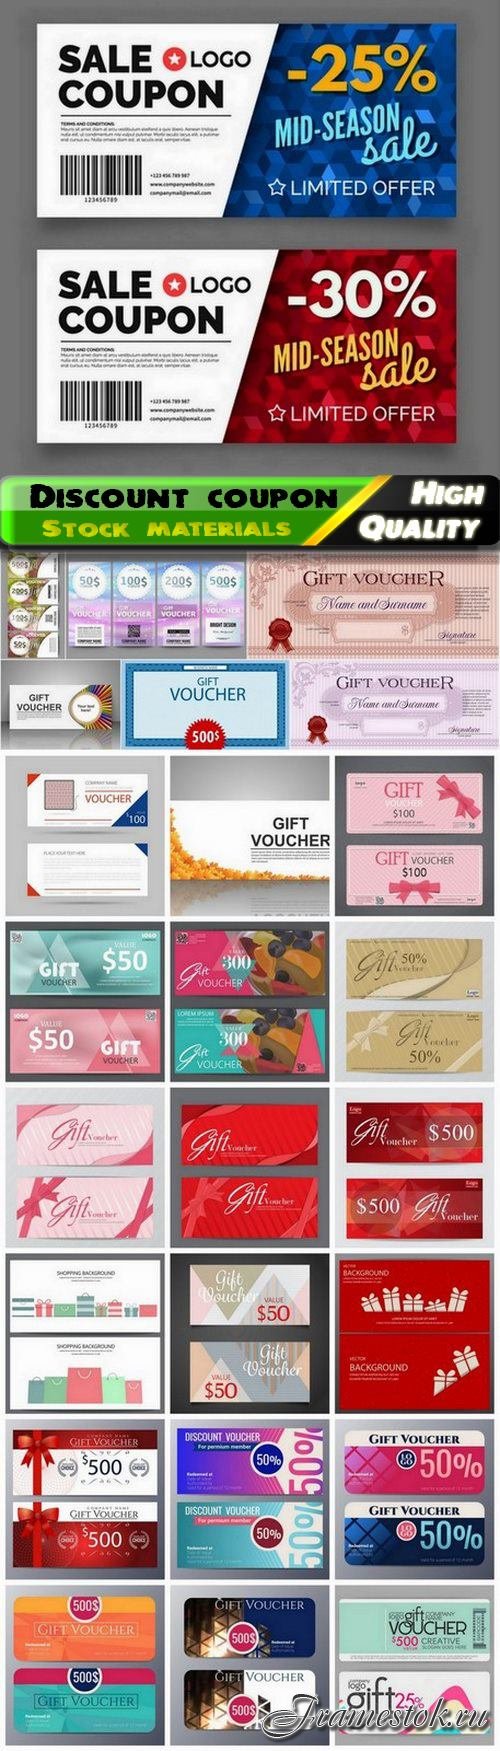 Discount coupon and gift voucher for business advertising 4 - 25 Eps